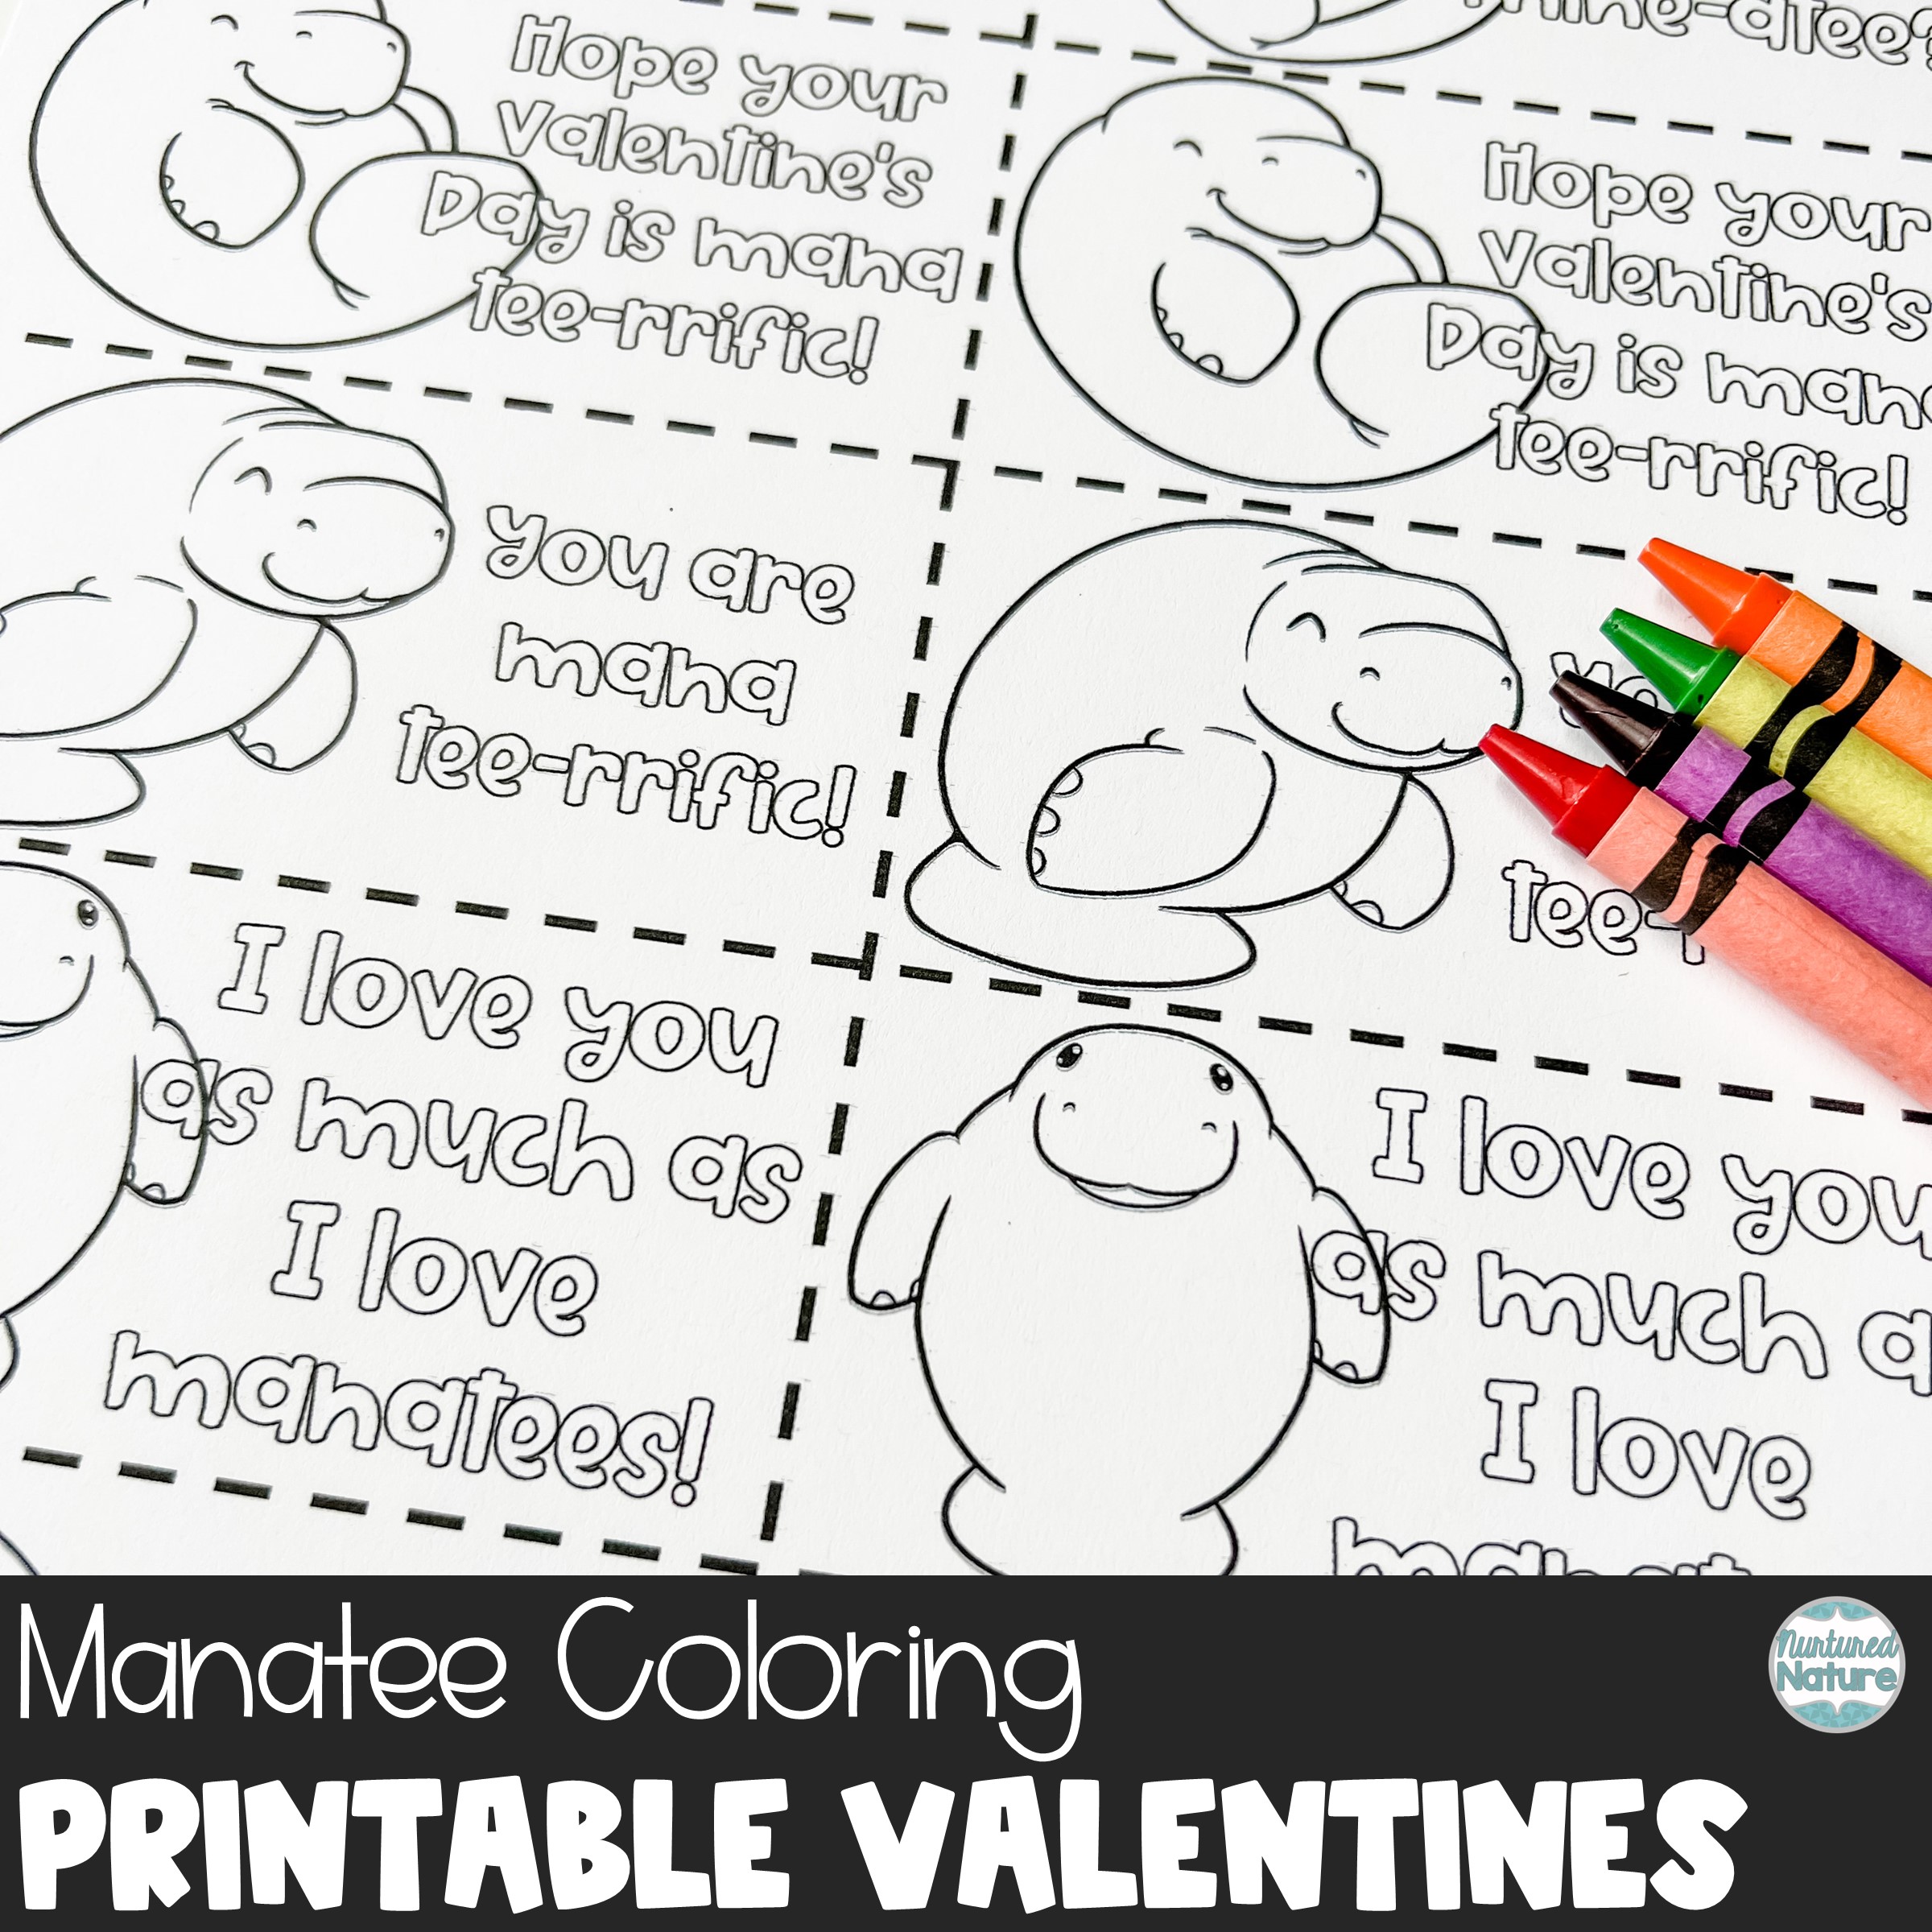 Manatee coloring valentines day cards printable made by teachers